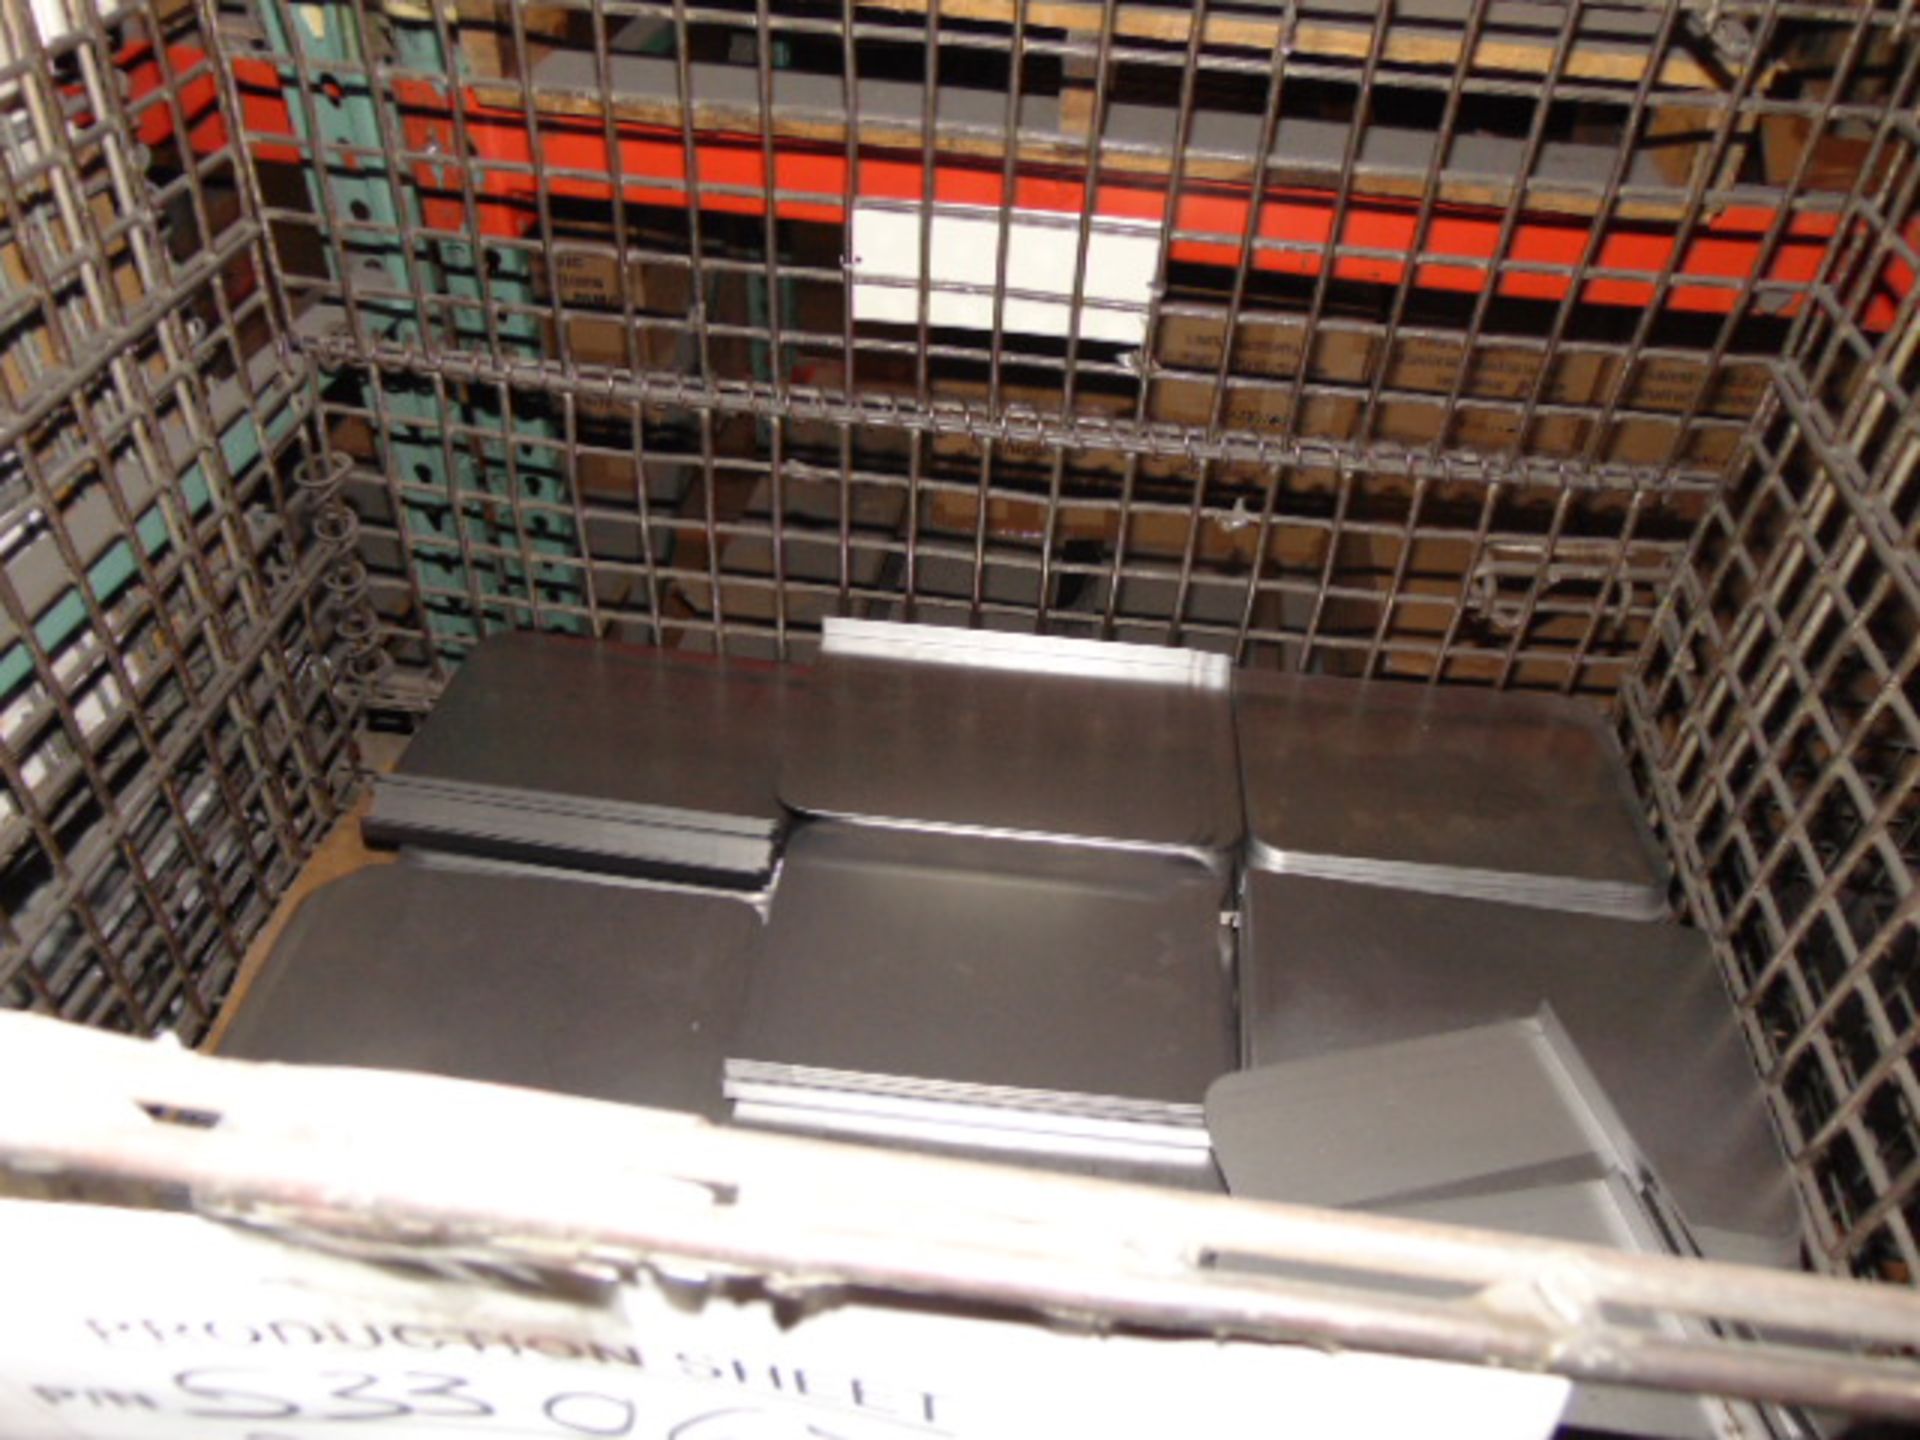 LOT CONTENTS OF PALLET RACKING SECTIONS (23) : steel parts, 3 x 5 followers, plastic hooks, - Image 38 of 43